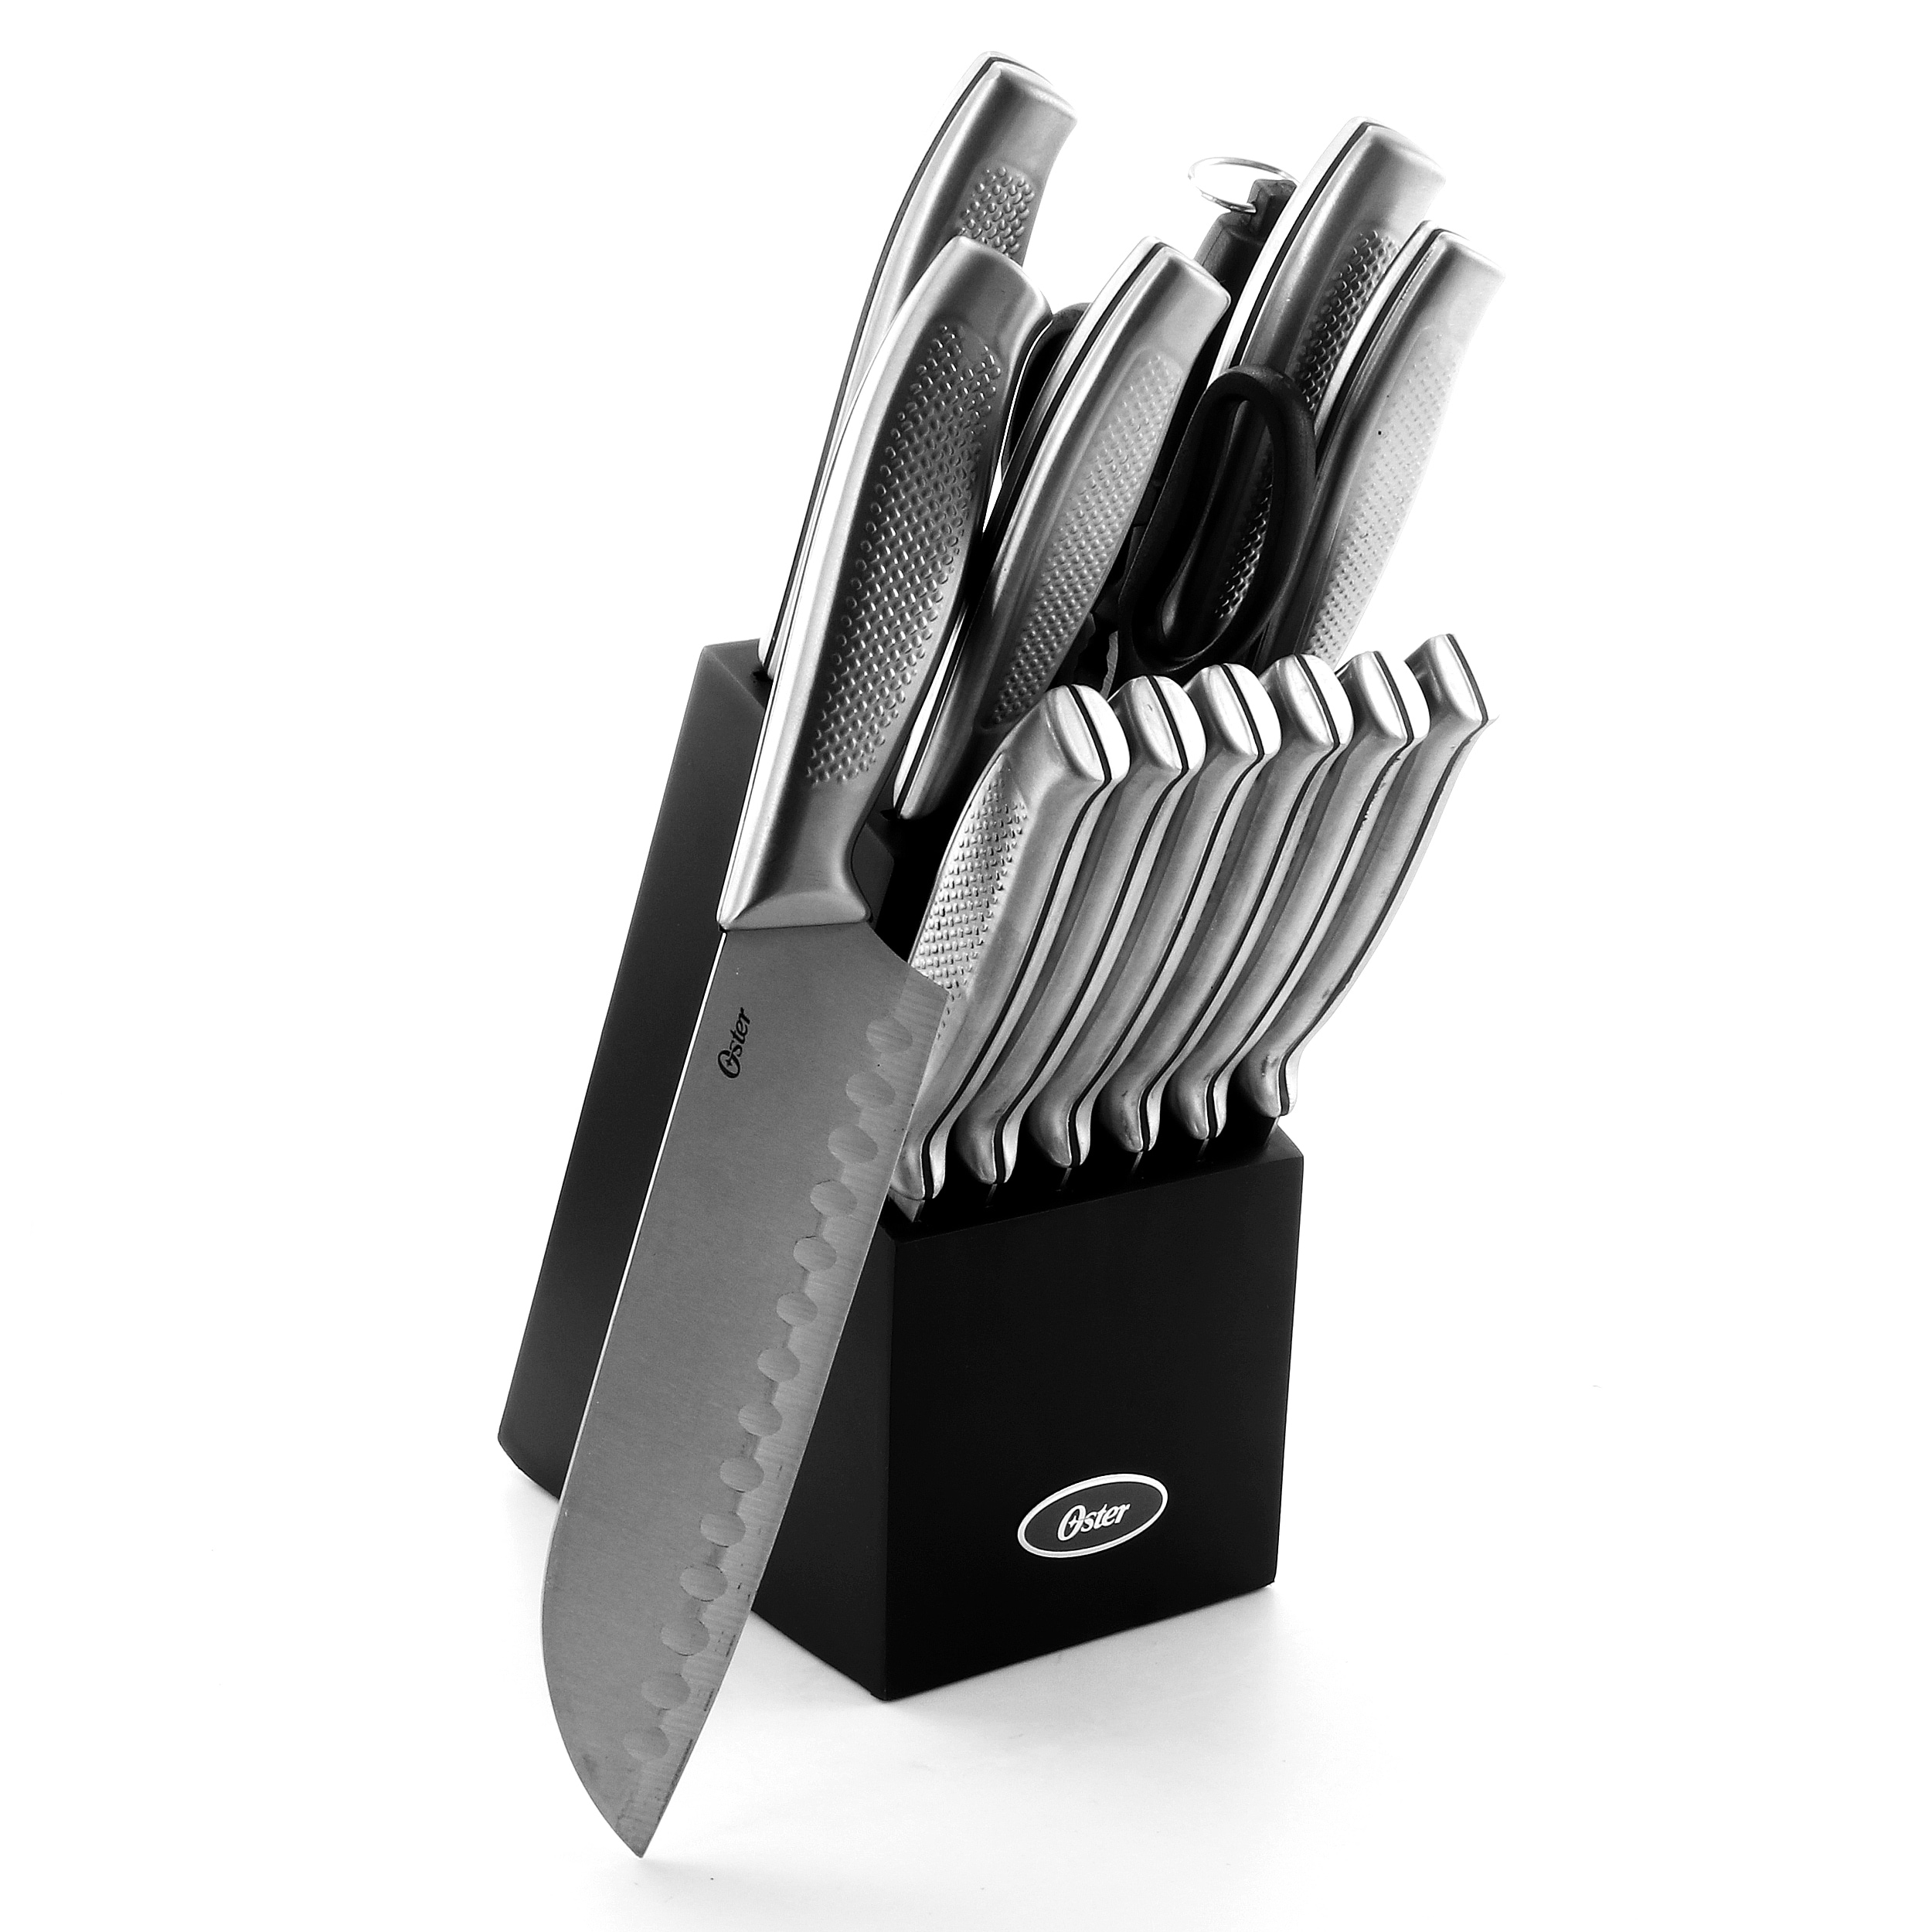 https://ak1.ostkcdn.com/images/products/is/images/direct/209c0f5394b1644ac08f3fd58f1883c0d9832537/Oster-Edgefield-14-Piece-Stainless-Steel-Cutlery-Knife-Set-withBlack-Knife-Block.jpg